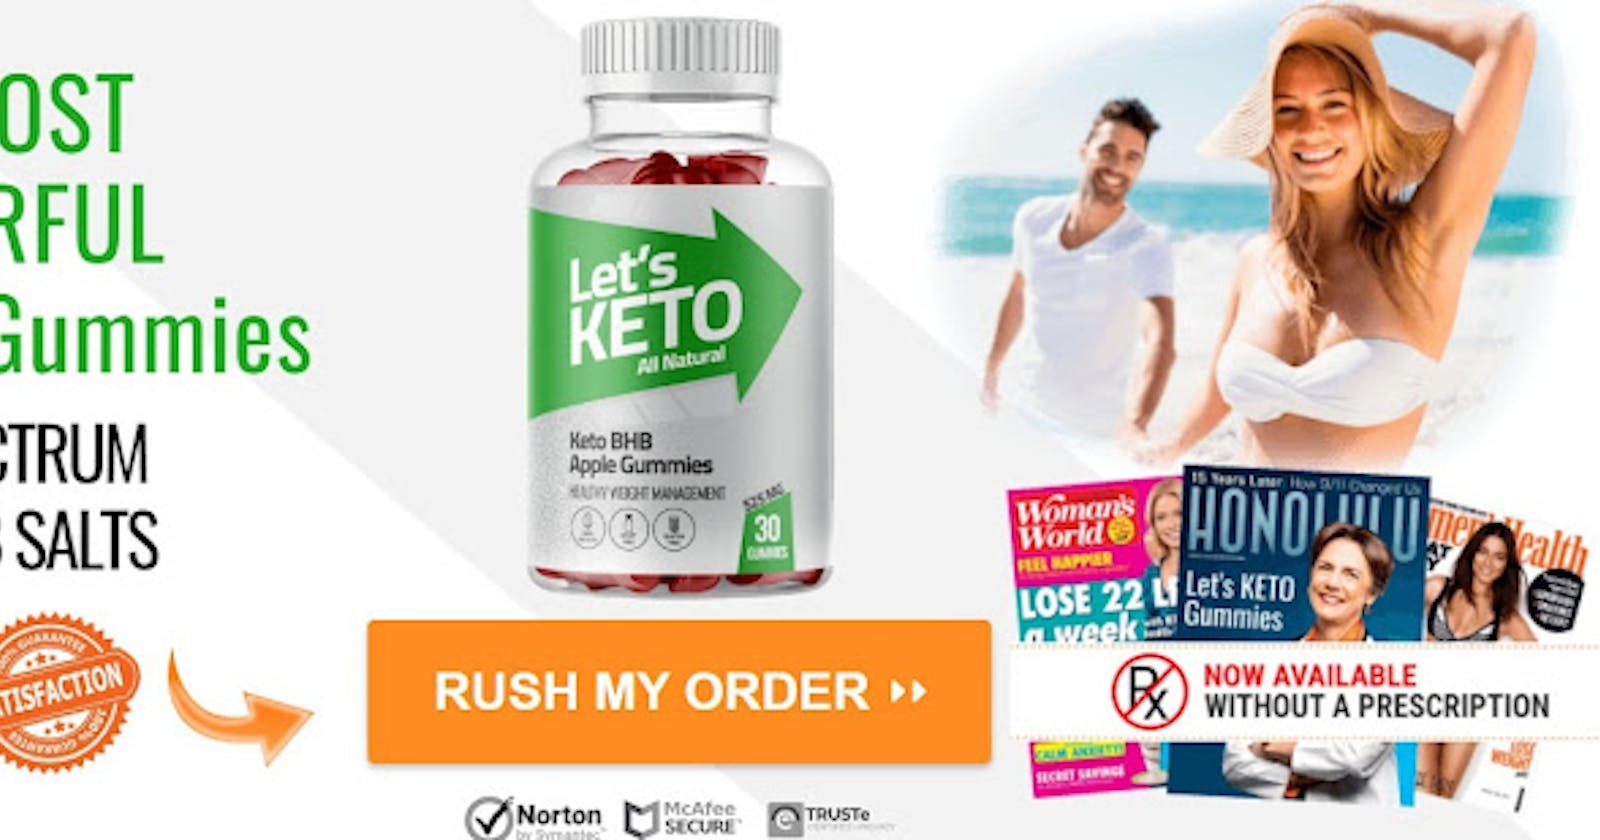 Tim Noakes Keto Gummies Reviews: Real or Hoax Price and Website- Free Trial Risk Warning? (South Africa)